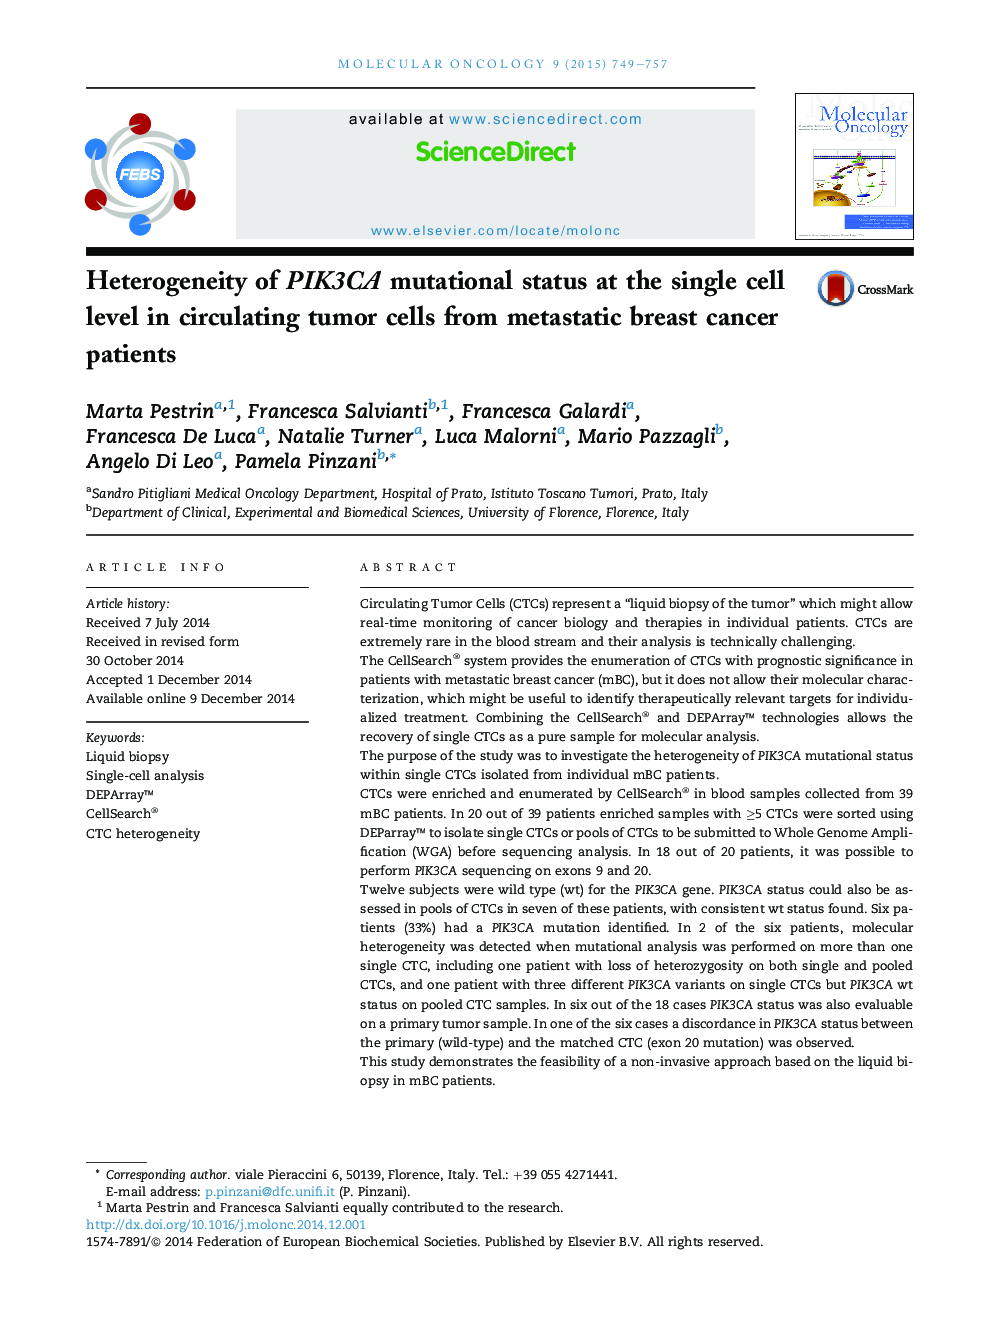 Heterogeneity of PIK3CA mutational status at the single cell level in circulating tumor cells from metastatic breast cancer patients